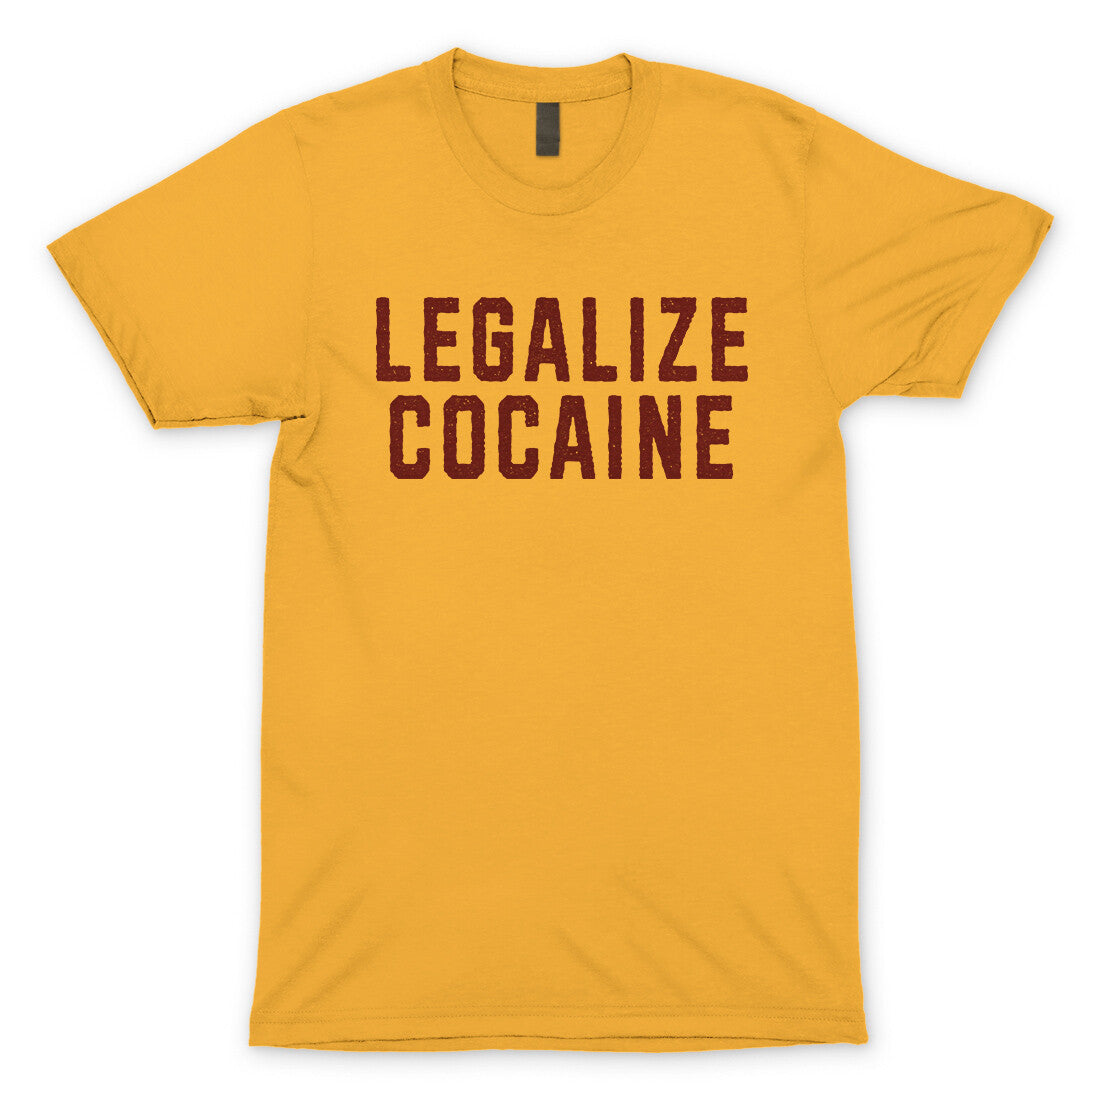 Legalize Cocaine in Gold Color